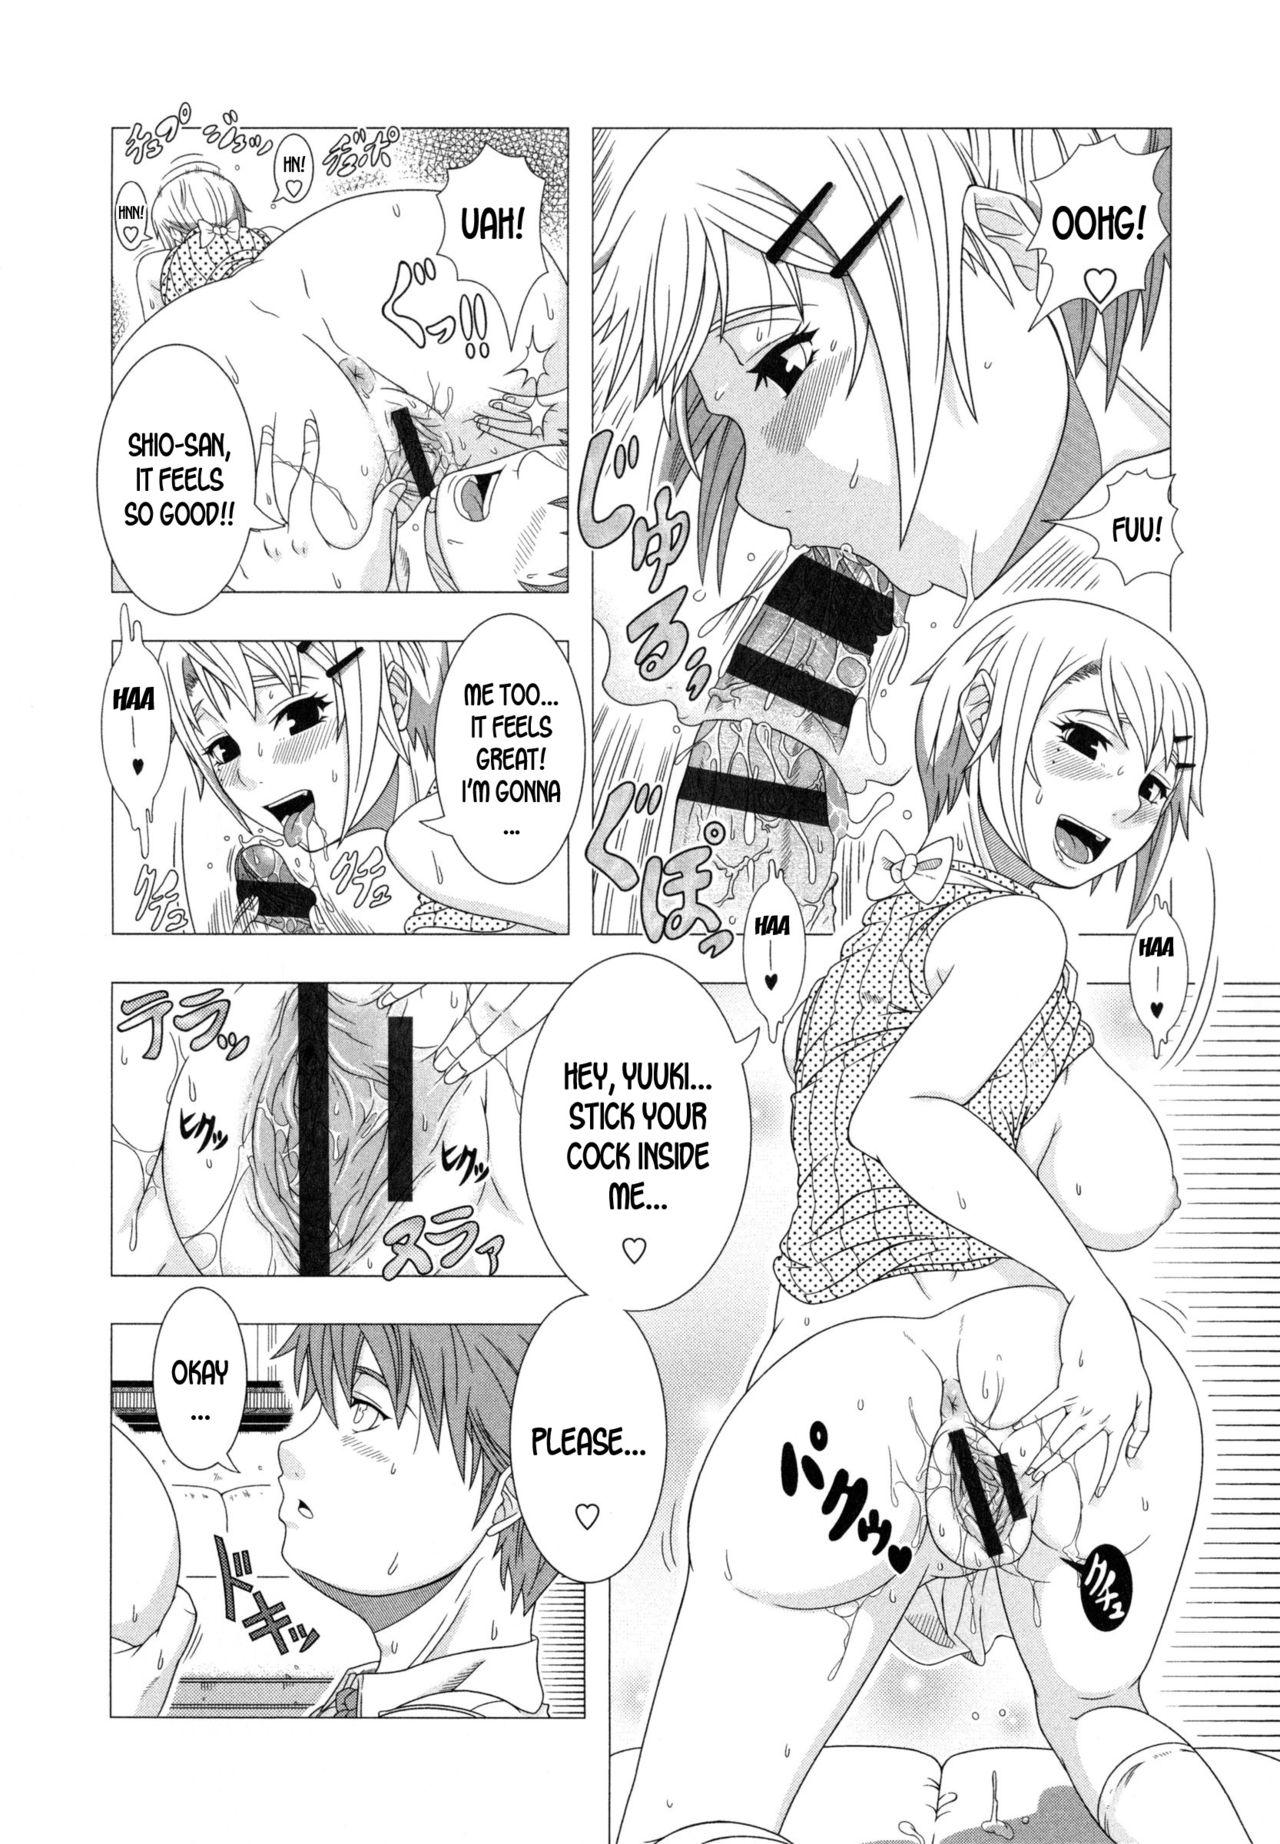 One Futari no Jikan | Our Time Together Lima - Page 12